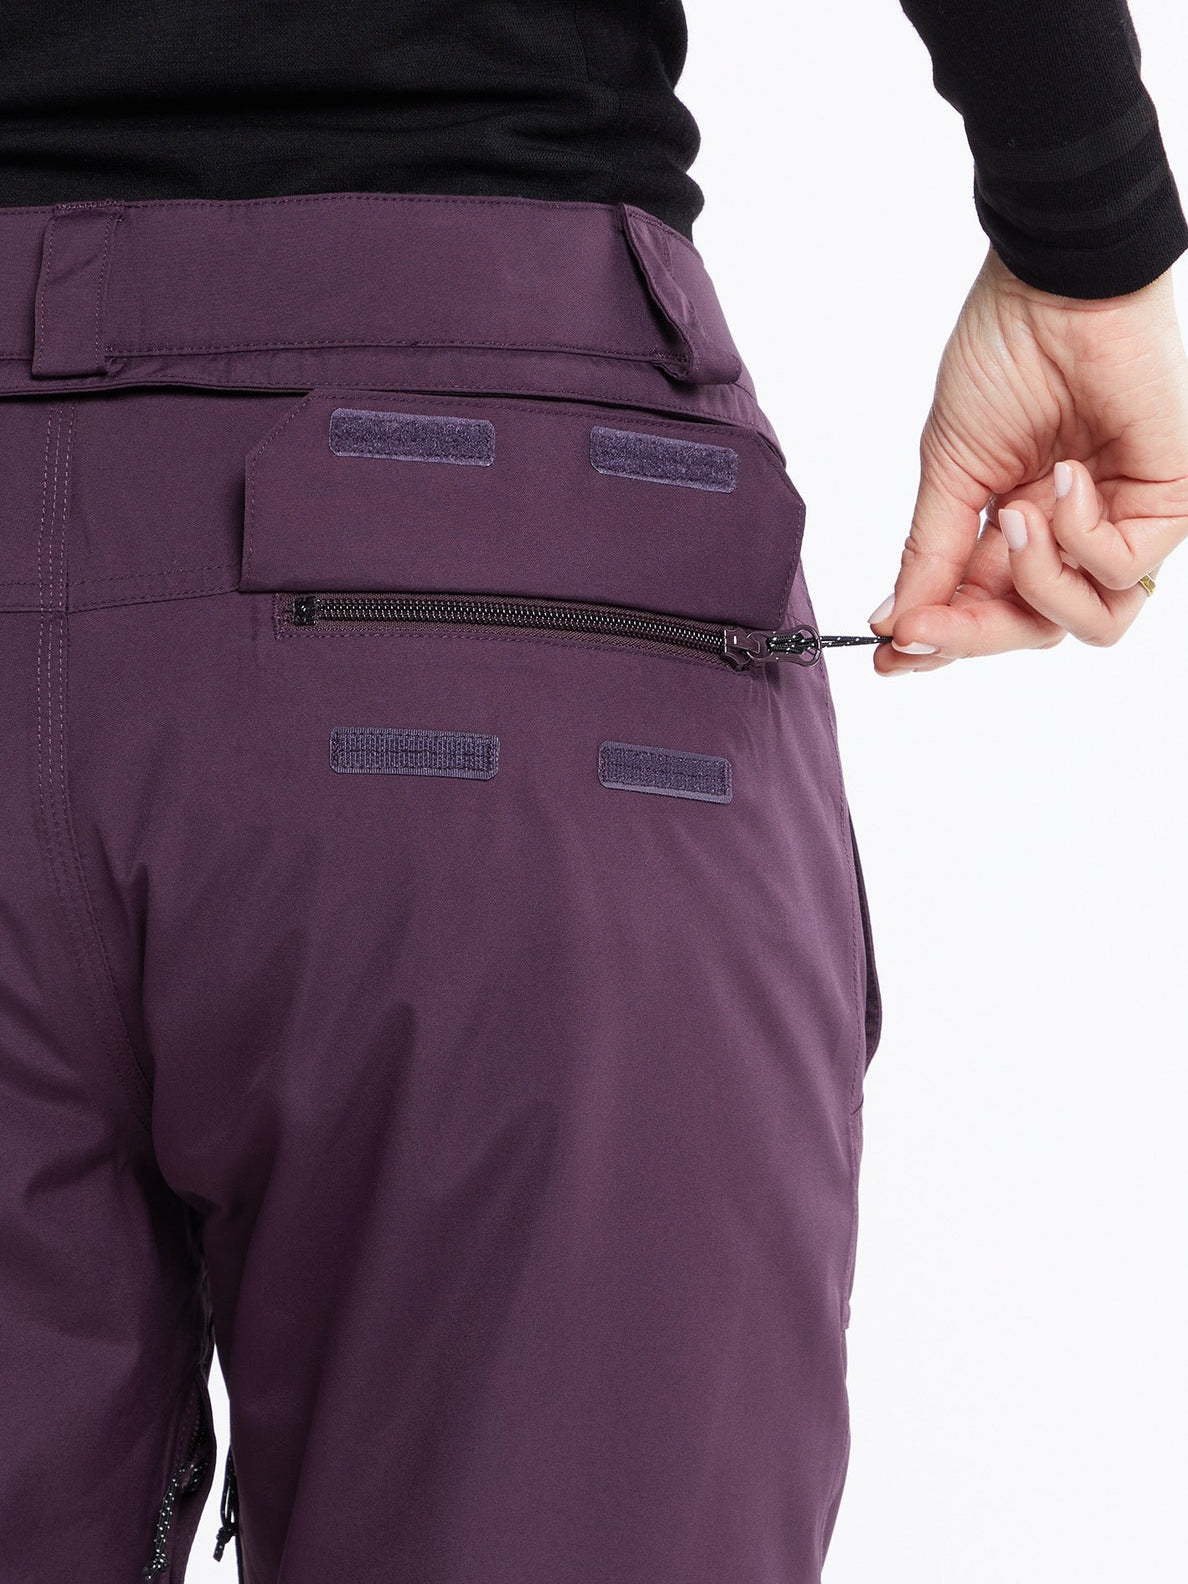 Knox Insulated Gore-Tex Trousers - BLACKBERRY (H1252400_BRY) [36]